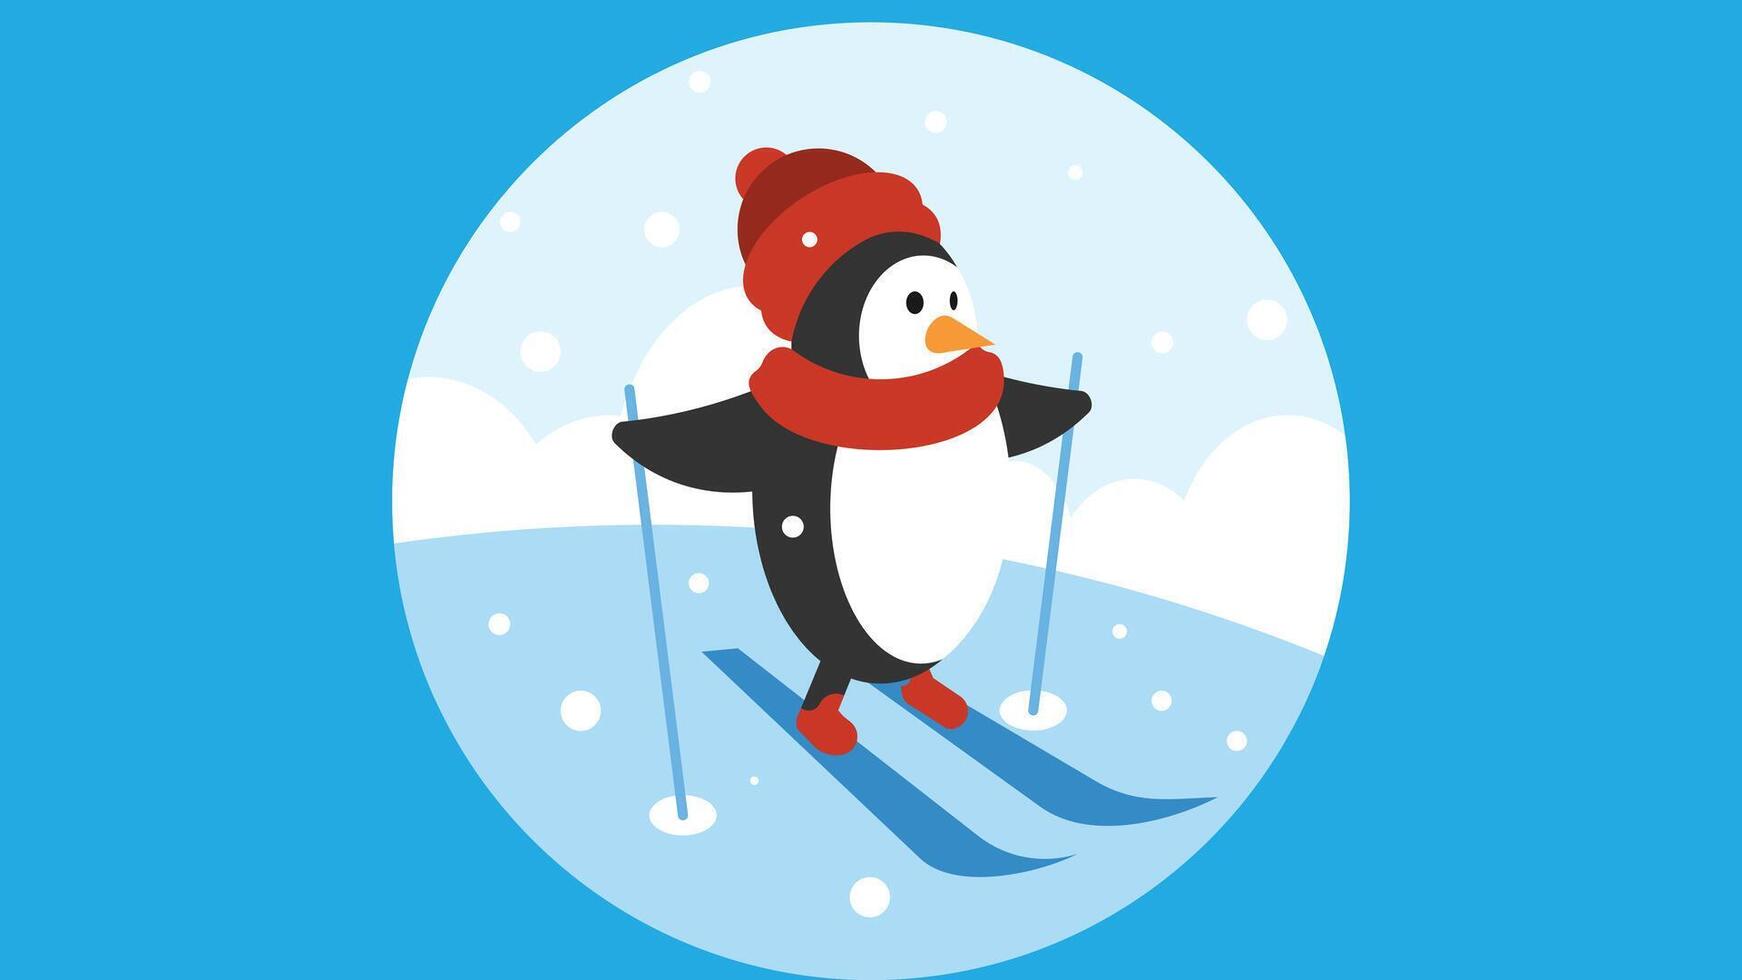 Cartoon character penguin skating on ice with ice skating kit vector